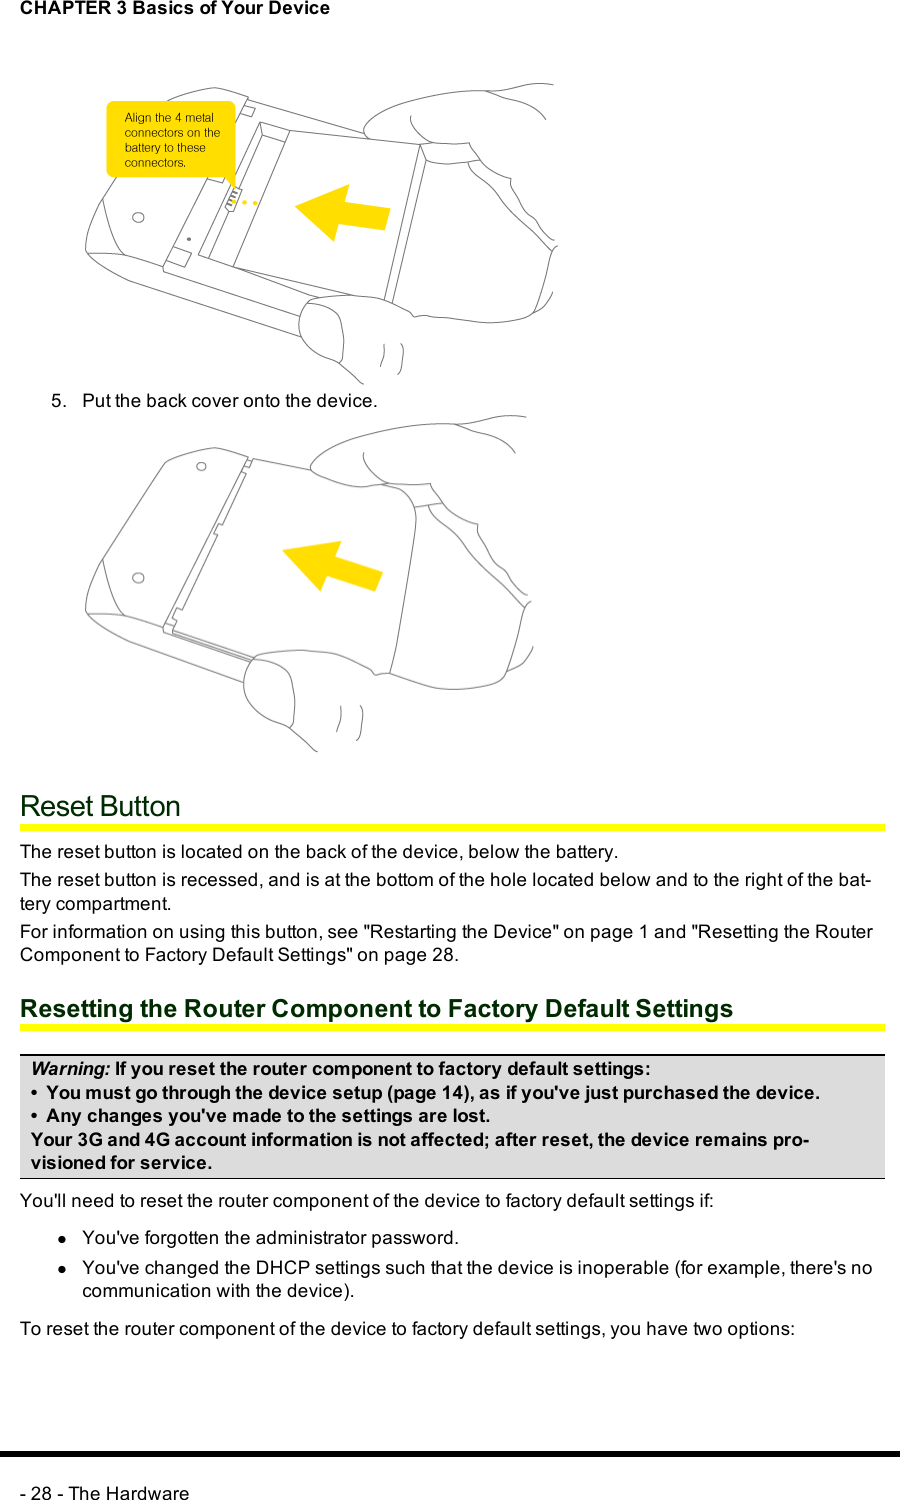 CHAPTER 3 Basics of Your Device5. Put the back cover onto the device.Reset ButtonThe reset button is located on the back of the device, below the battery.The reset button is recessed, and is at the bottom of the hole located below and to the right of the bat-tery compartment.For information on using this button, see &quot;Restarting the Device&quot; on page 1 and &quot;Resetting the RouterComponent to Factory Default Settings&quot; on page 28.Resetting the Router Component to Factory Default SettingsWarning: If you reset the router component to factory default settings:• You must go through the device setup (page 14), as if you&apos;ve just purchased the device.• Any changes you&apos;ve made to the settings are lost.Your 3G and 4G account information is not affected; after reset, the device remains pro-visioned for service.You&apos;ll need to reset the router component of the device to factory default settings if:lYou&apos;ve forgotten the administrator password.lYou&apos;ve changed the DHCP settings such that the device is inoperable (for example, there&apos;s nocommunication with the device).To reset the router component of the device to factory default settings, you have two options:- 28 - The Hardware